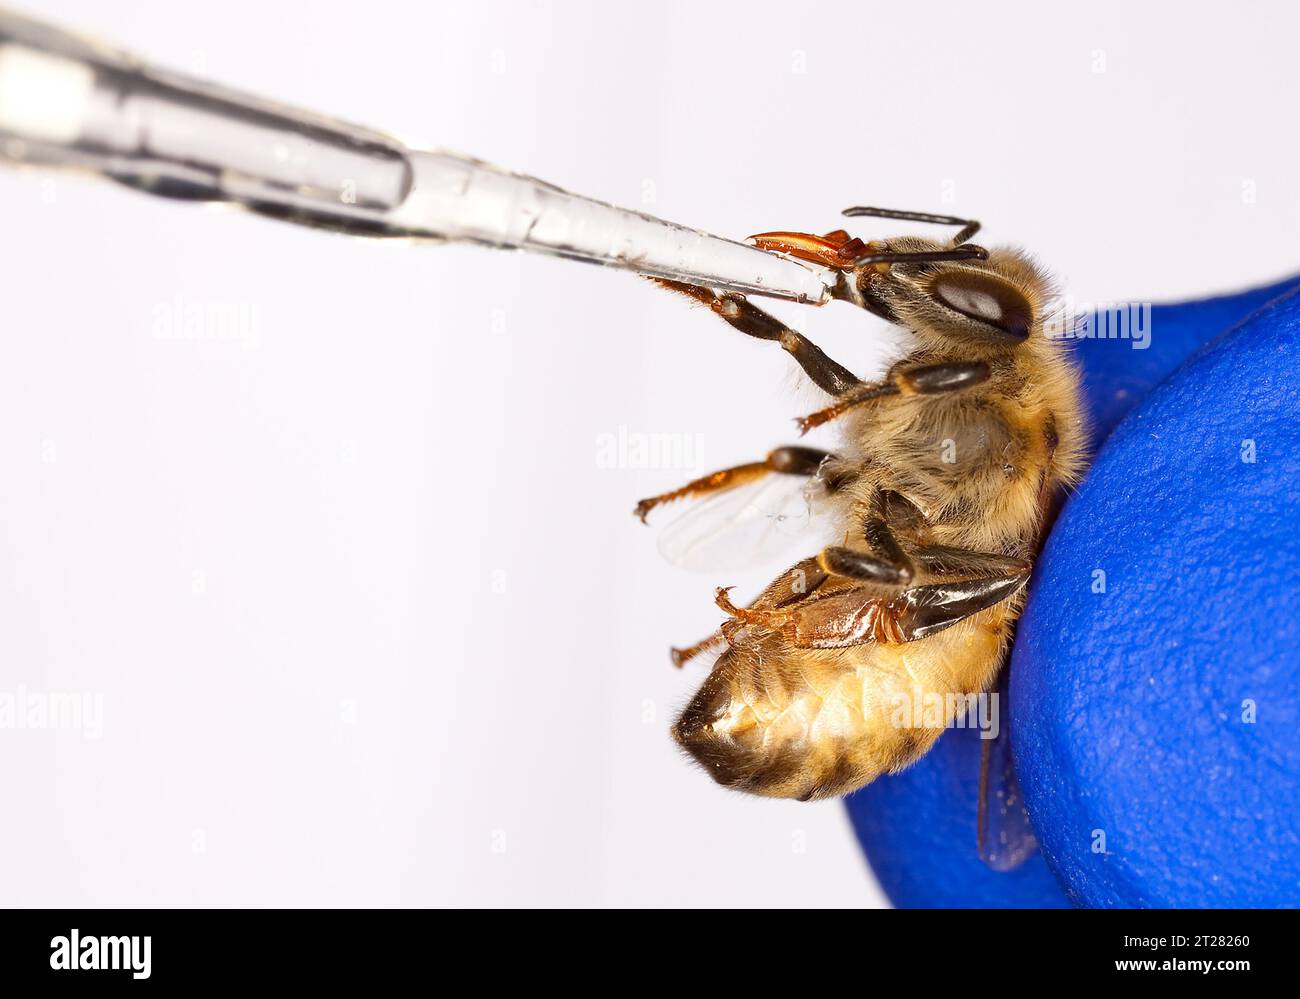 A honey bee being inoculated with Nosema to determine bee infection rates and immune responses. Scientists and others have been working for years to try to solve the puzzling honey bee syndrome known as “colony collapse disorder.” Stock Photo